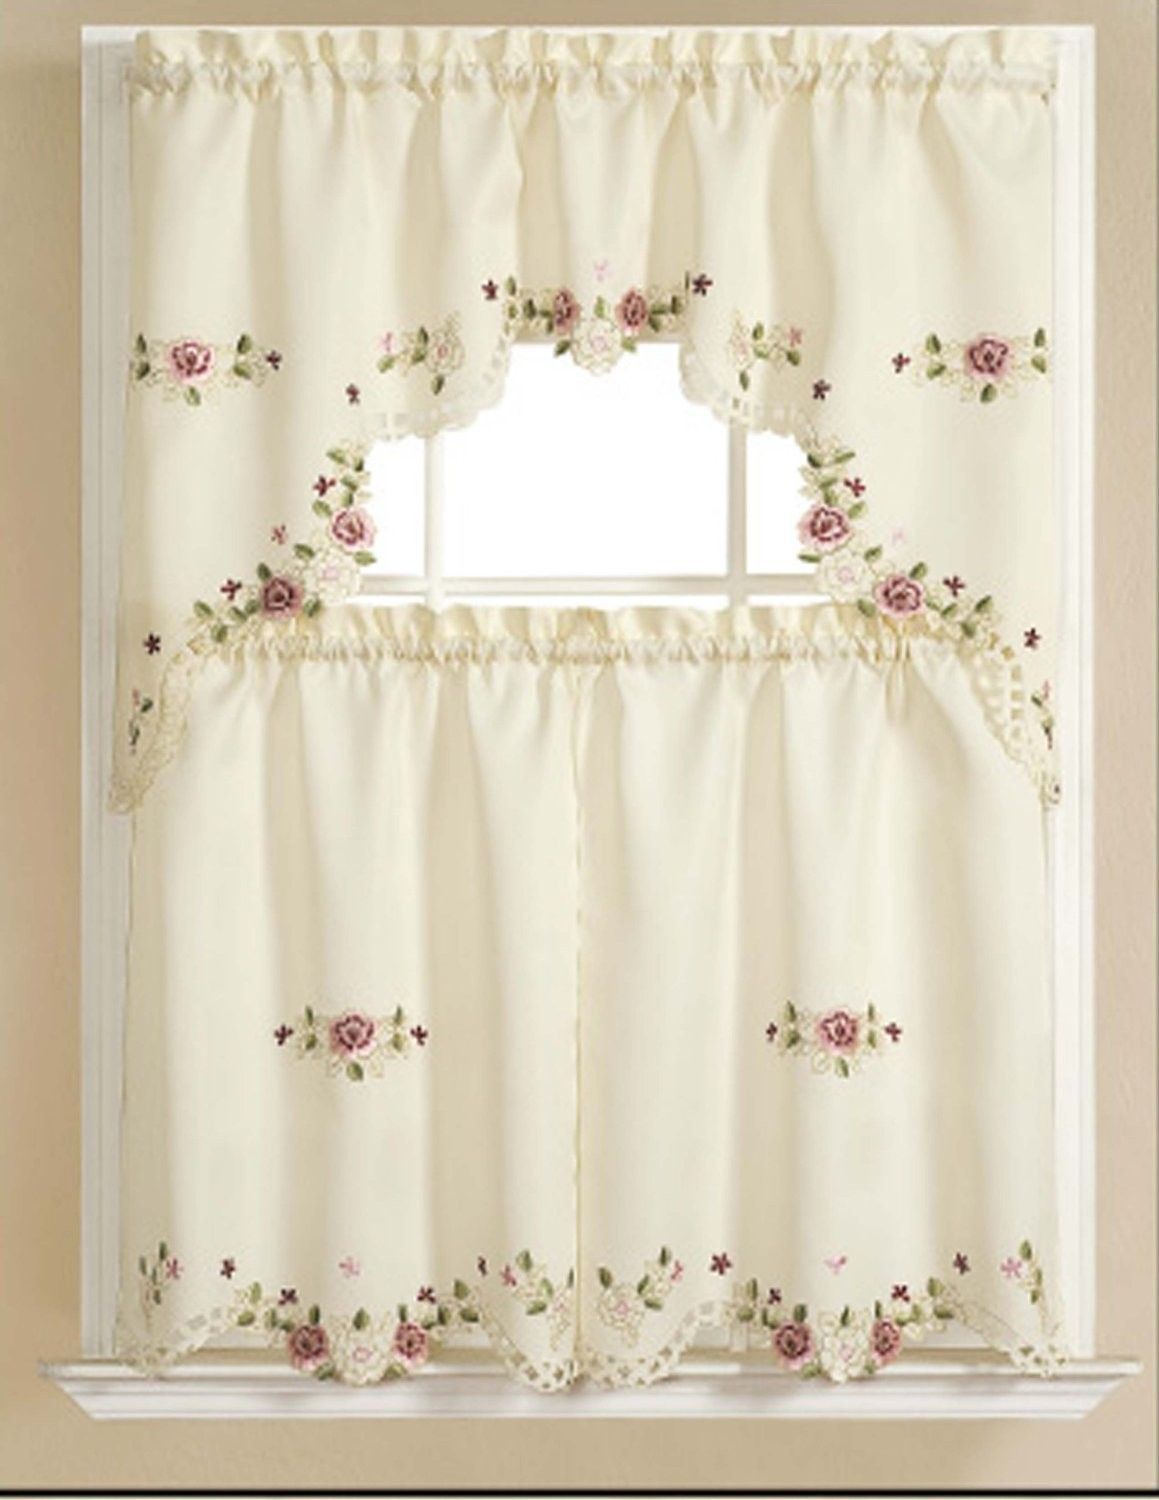 Alisha Elegant Embroidered Kitchen Curtain Swag & Tiers Set Pertaining To Spring Daisy Tiered Curtain 3 Piece Sets (View 4 of 20)